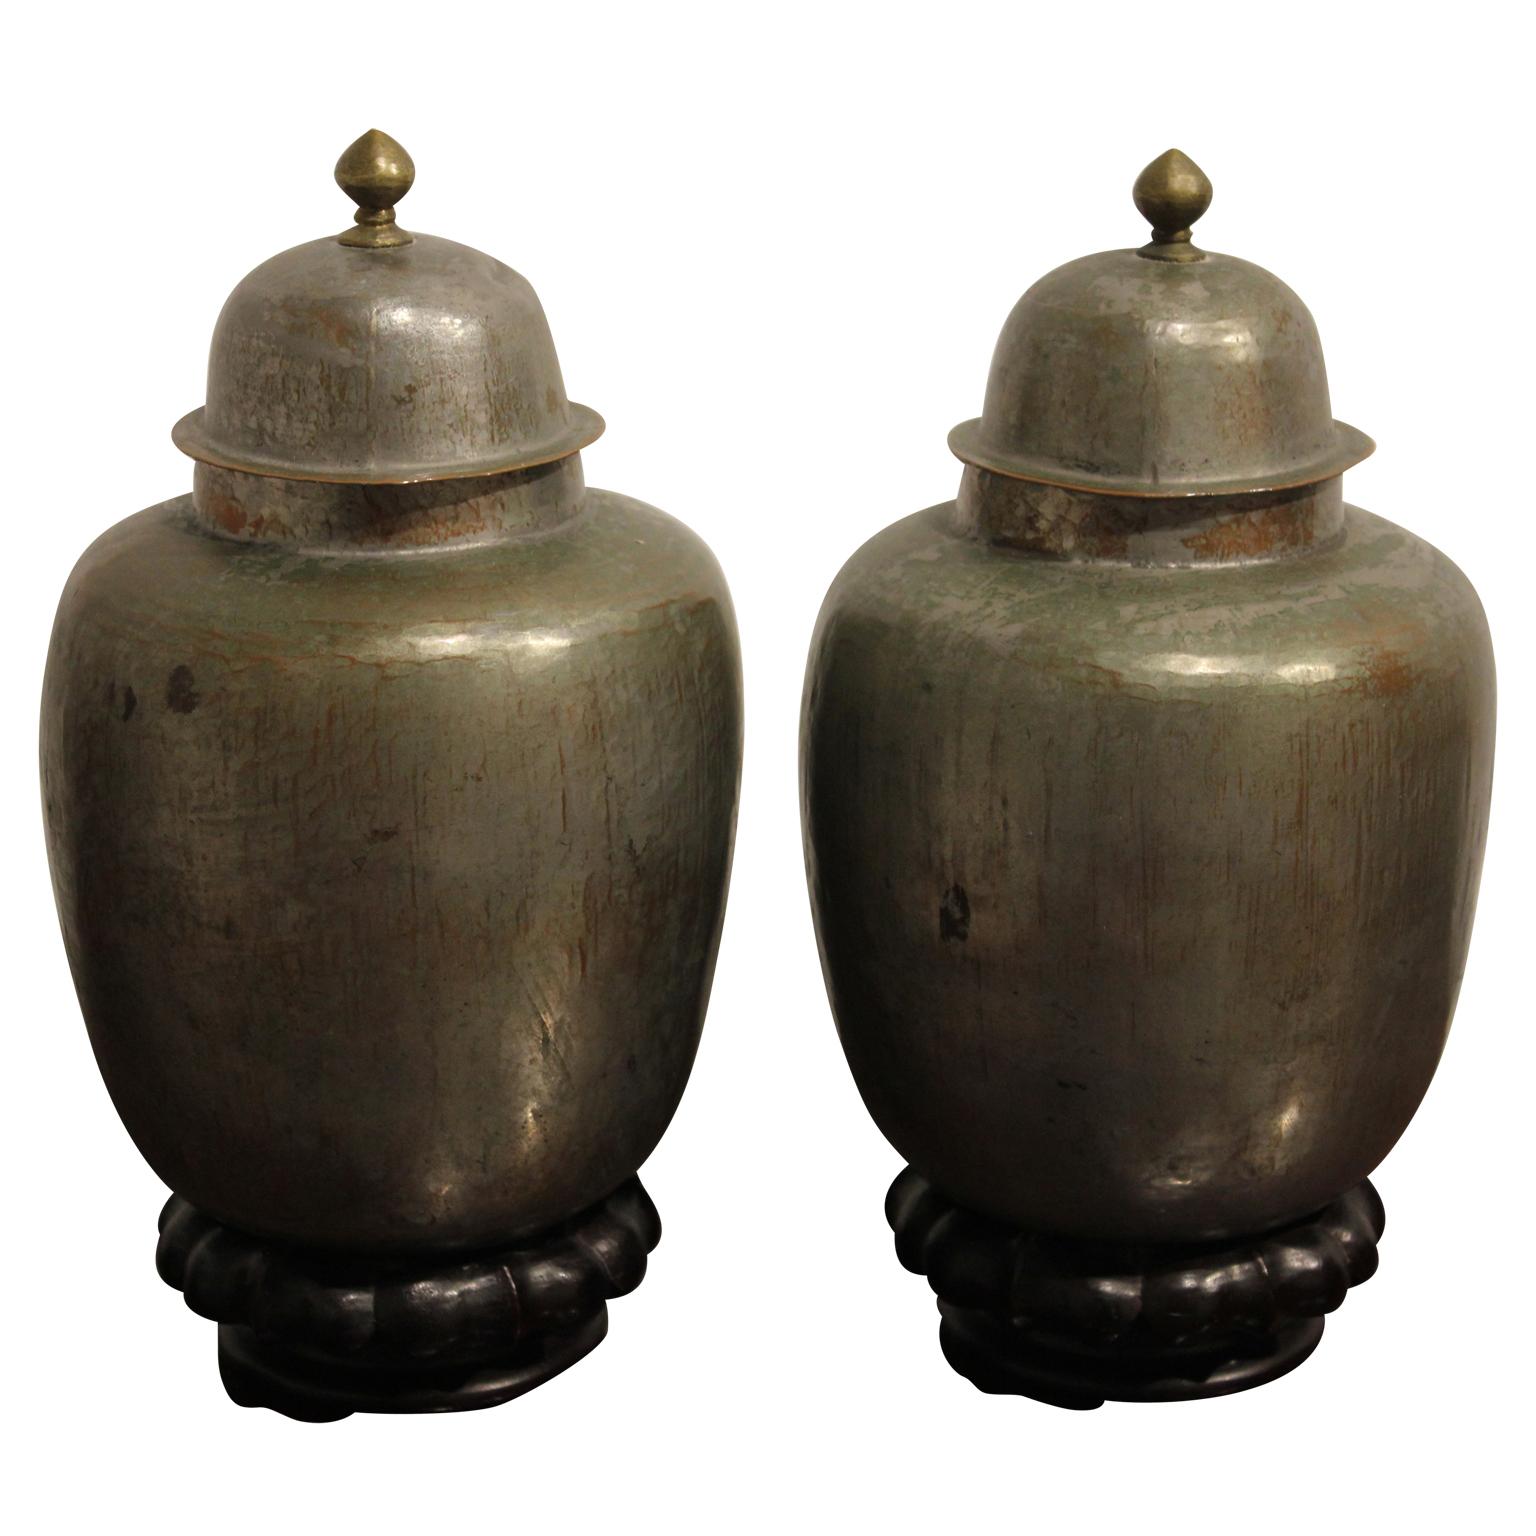 Chinese Export Decorative Pair of Metal Vessels with a Wooden Pedestal